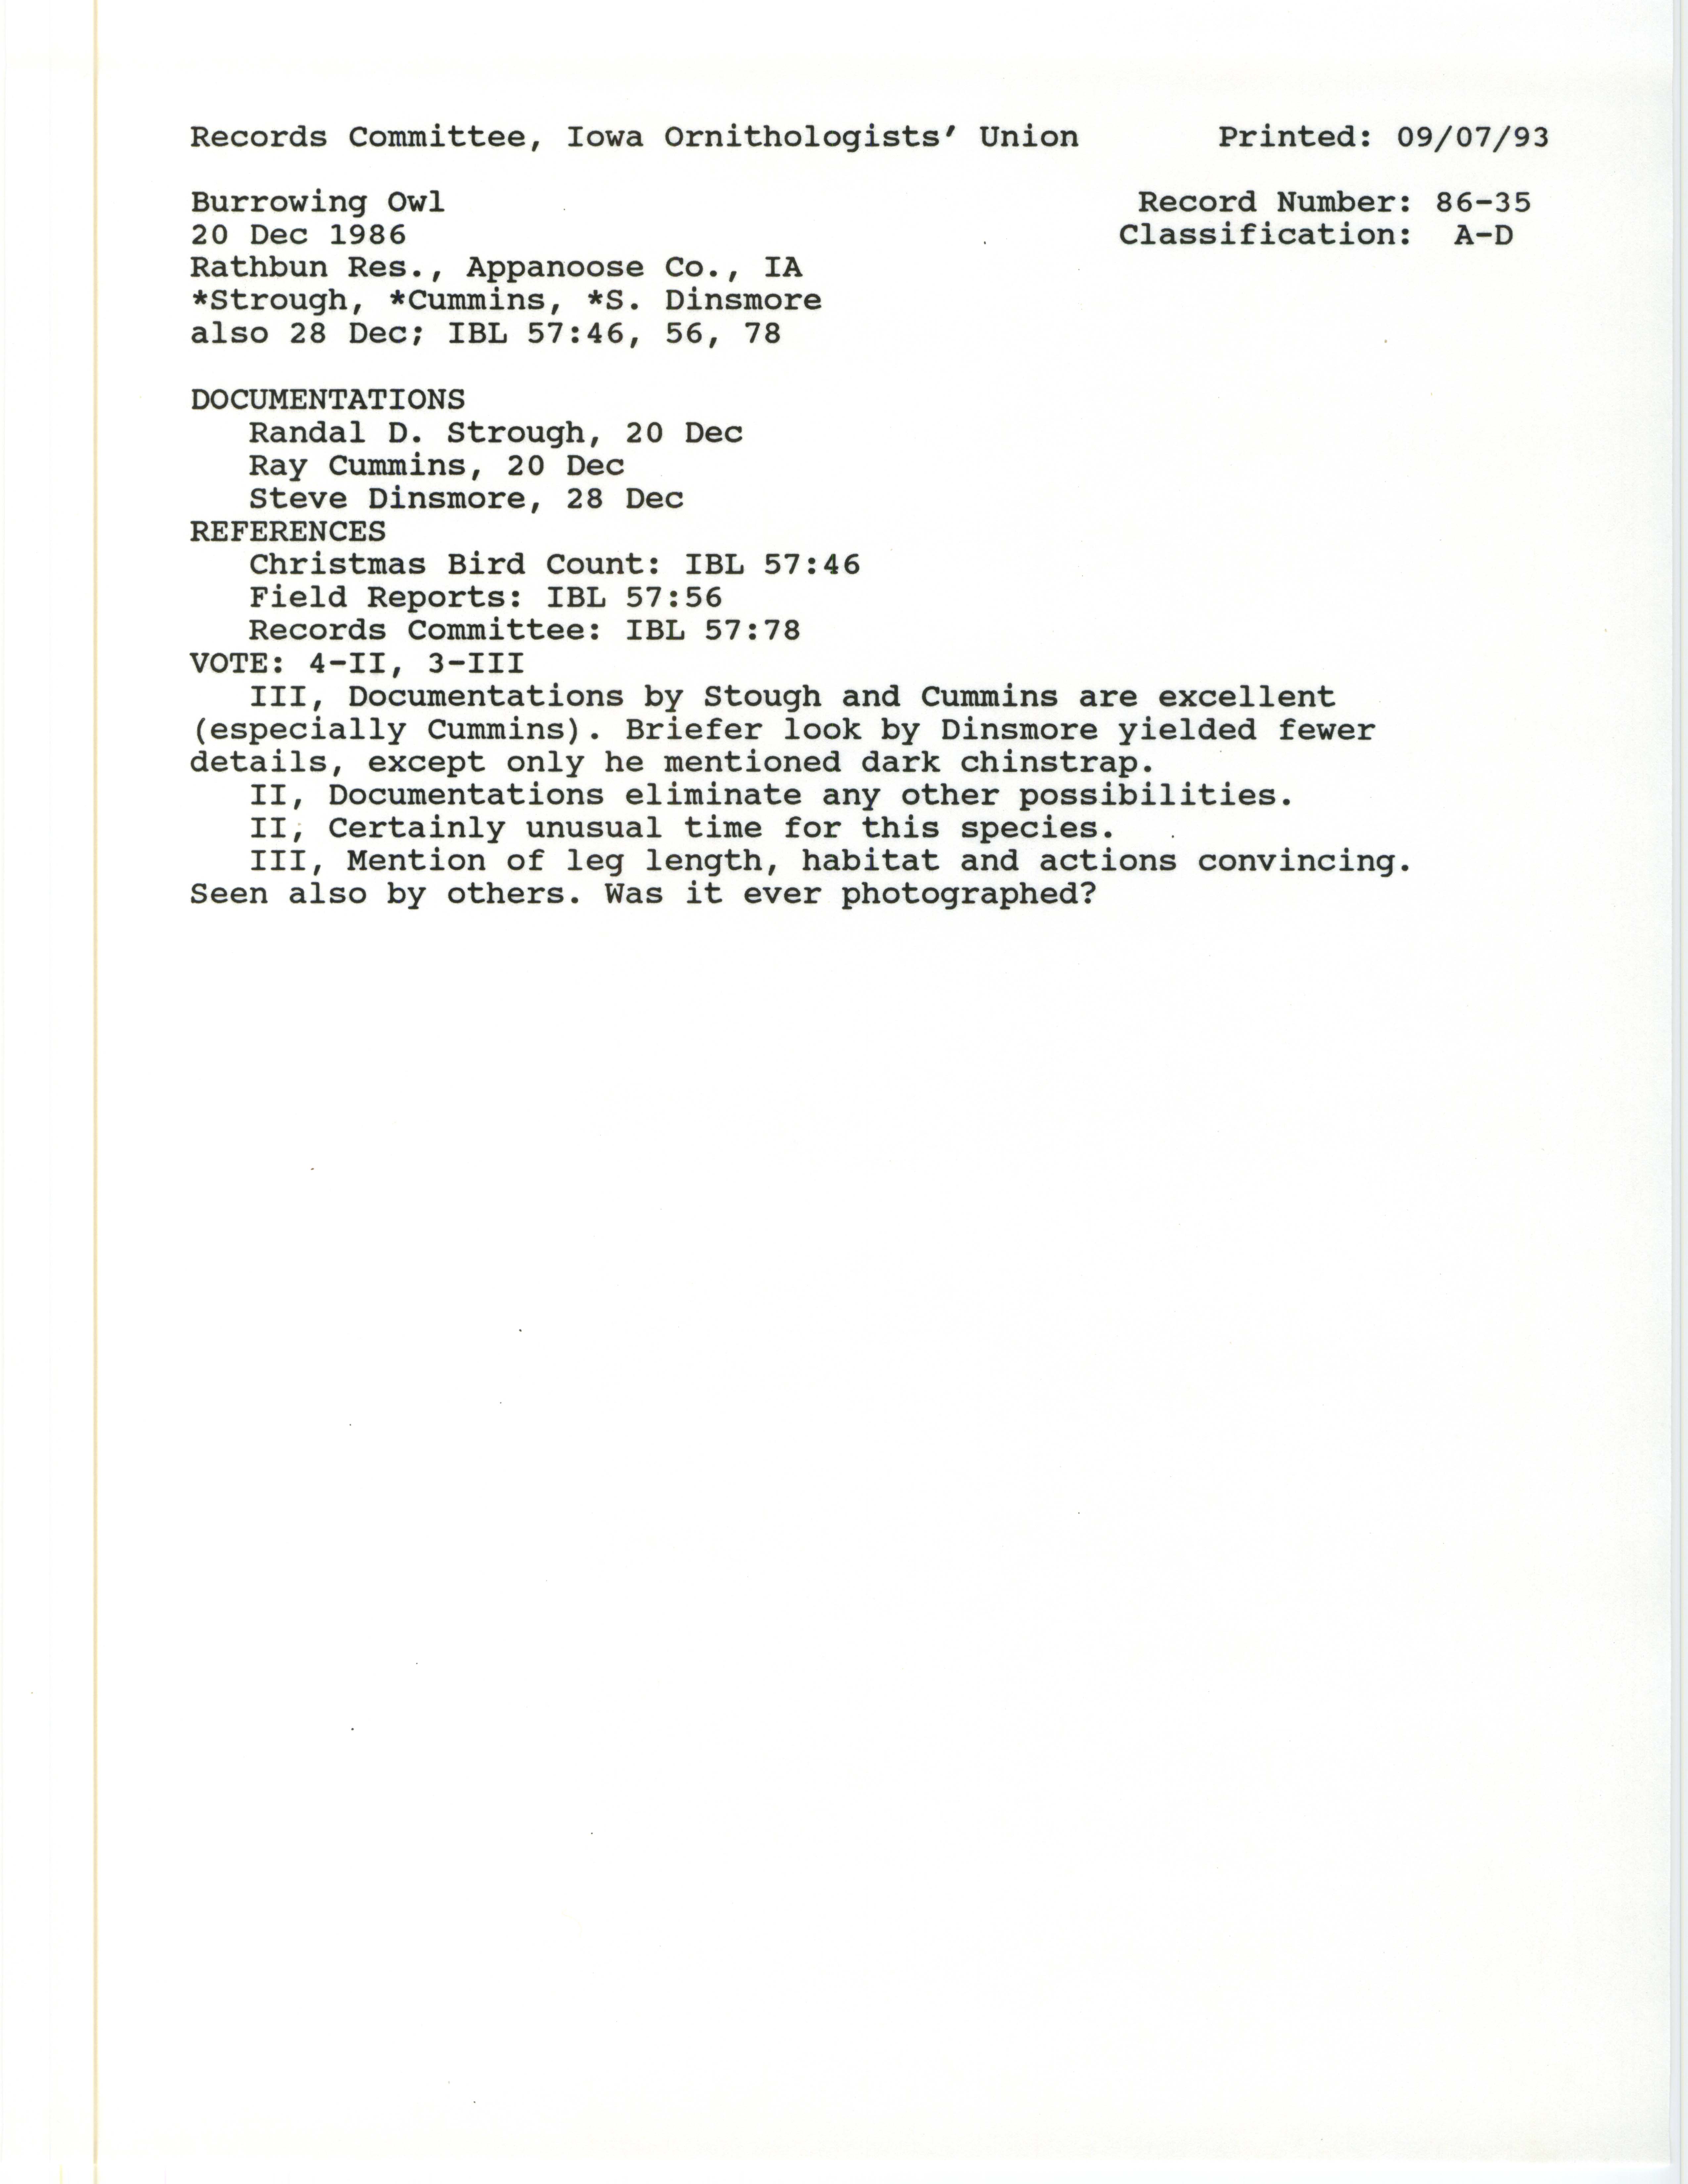 Records Committee review for rare bird sighting for Burrowing Owl at Rathbun Reservoir, 1986